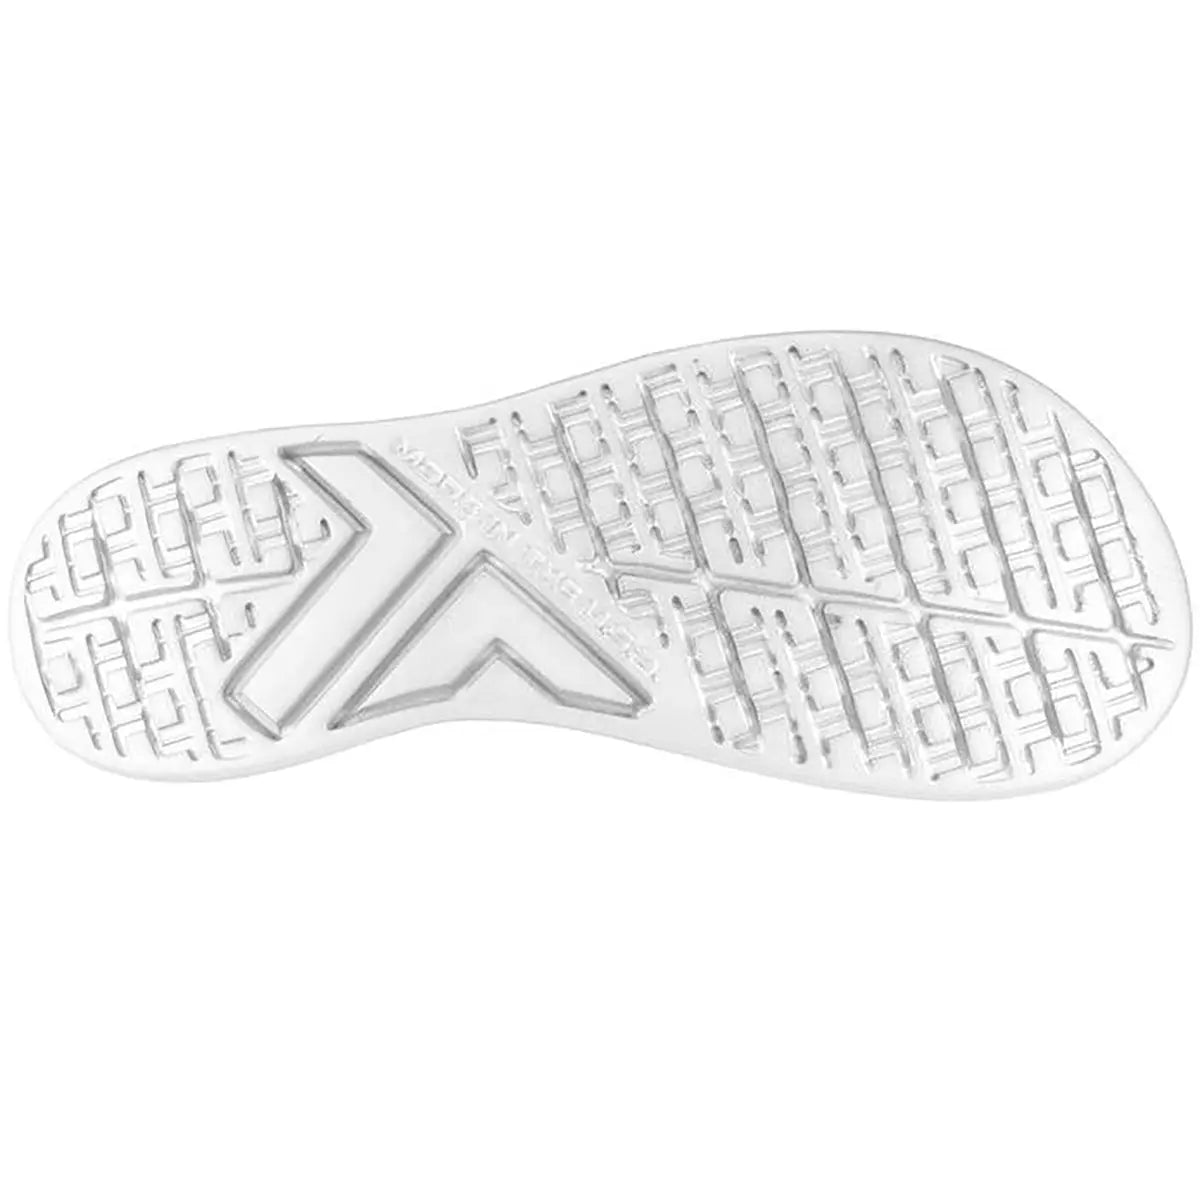 Telic Arch Support Pain Relief Energy Flip Flops